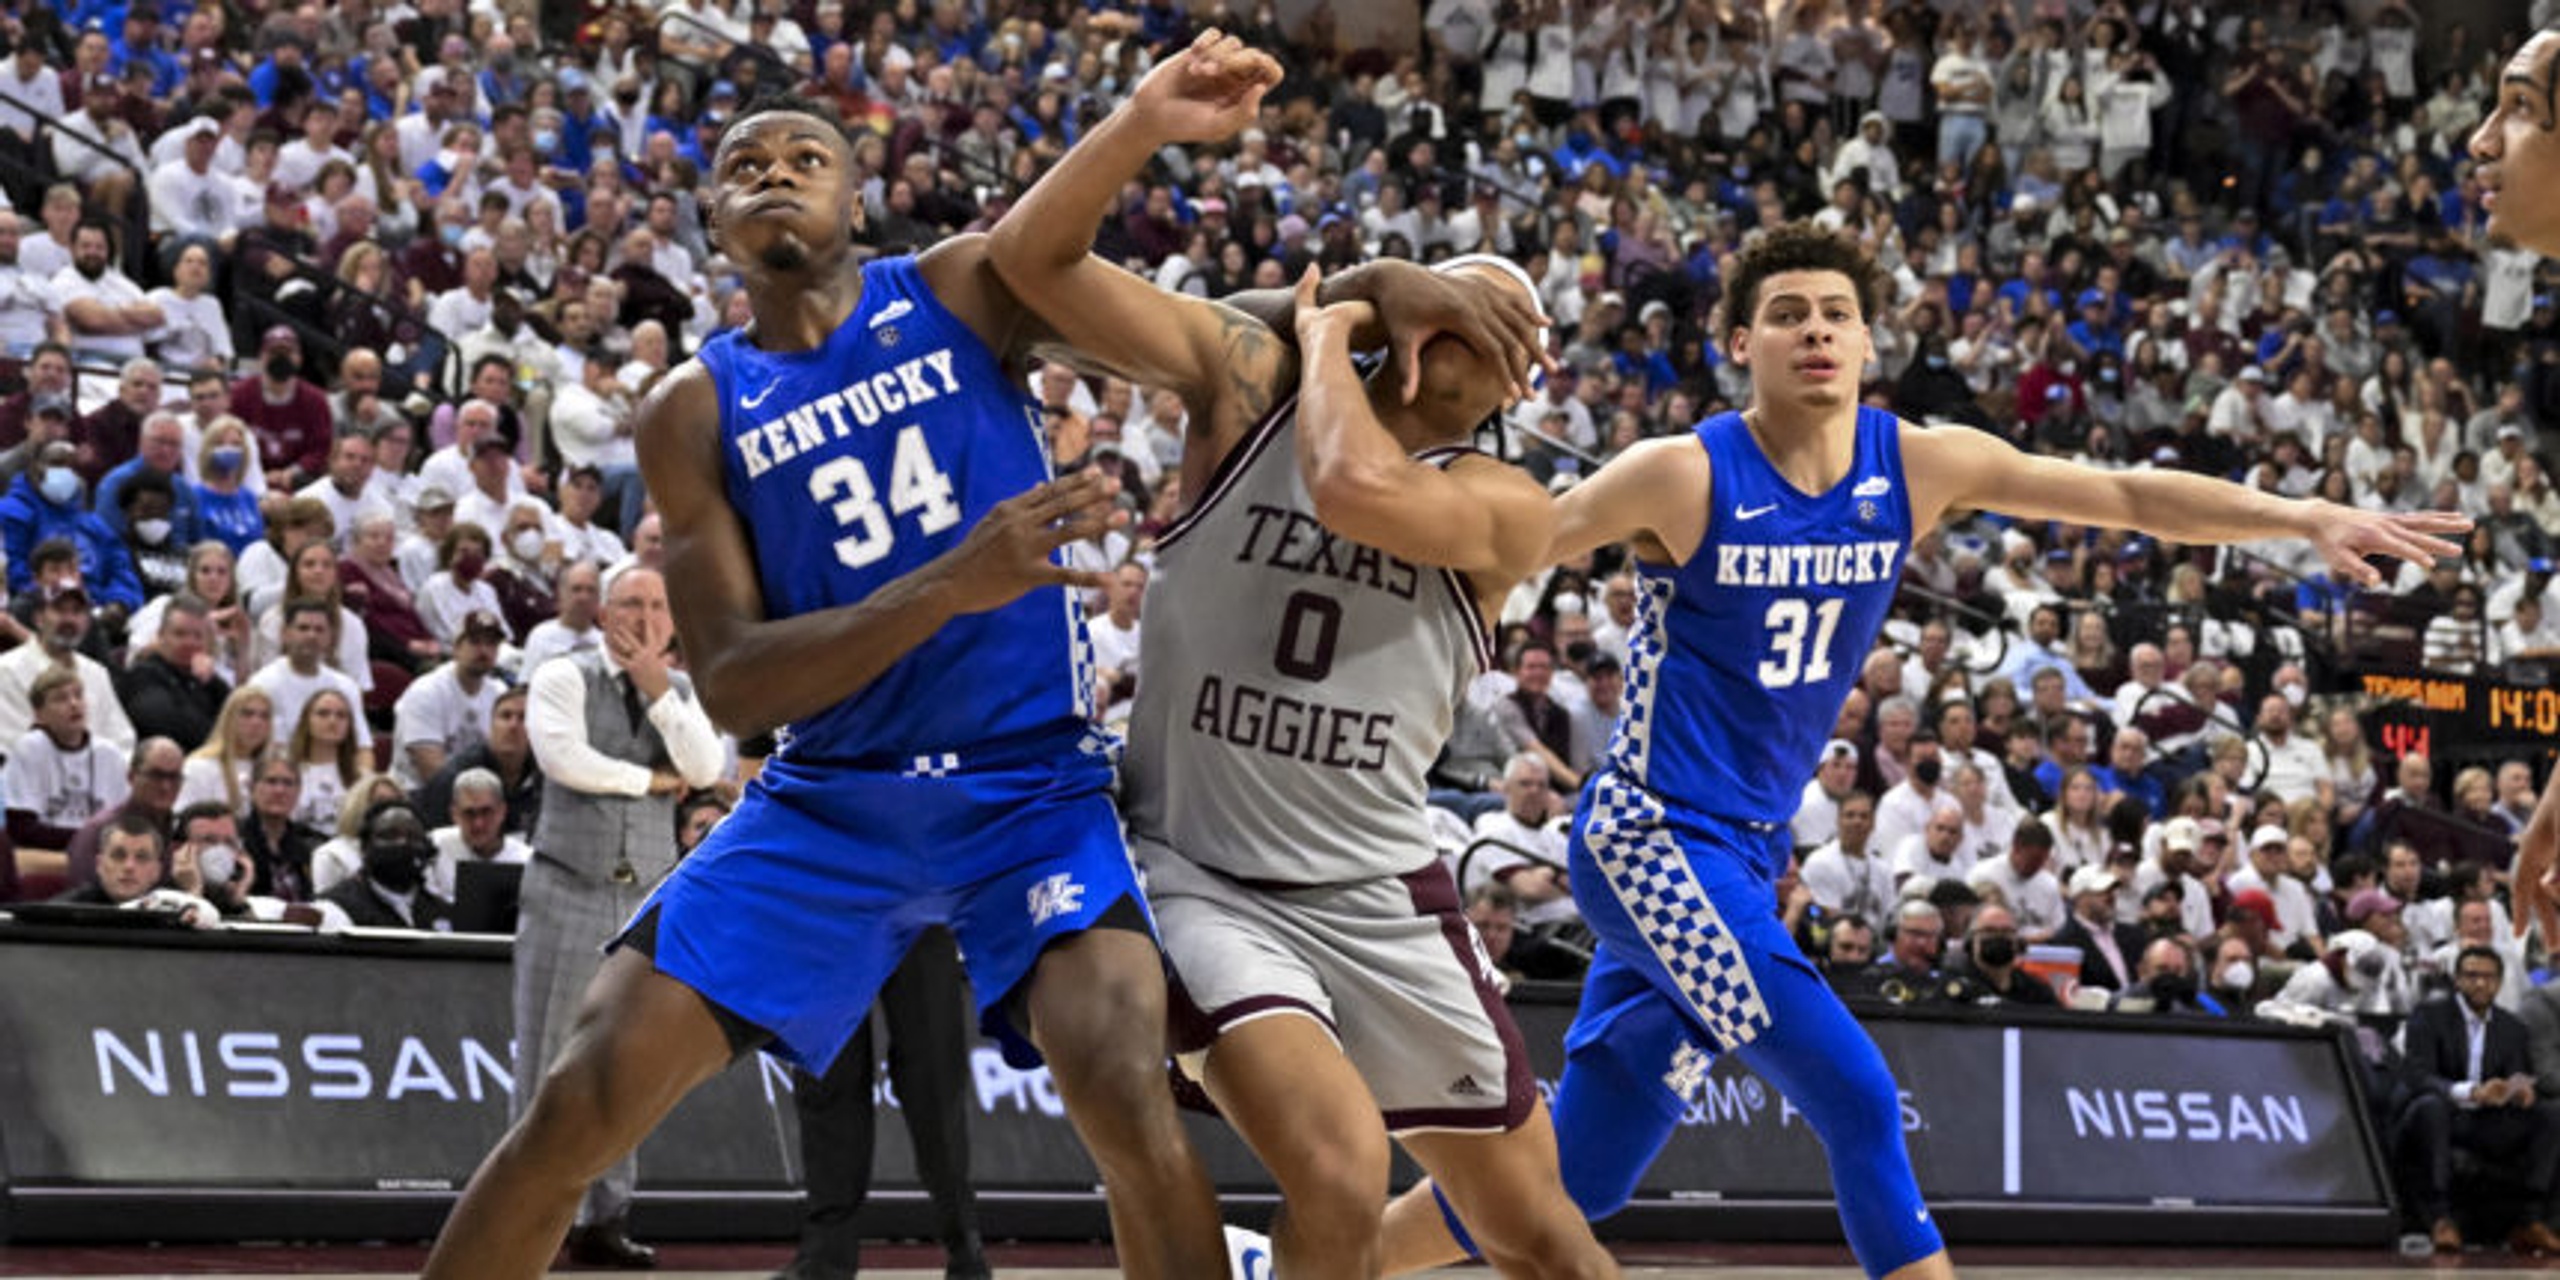 Kentucky holds off Texas A&M, wins in College Station